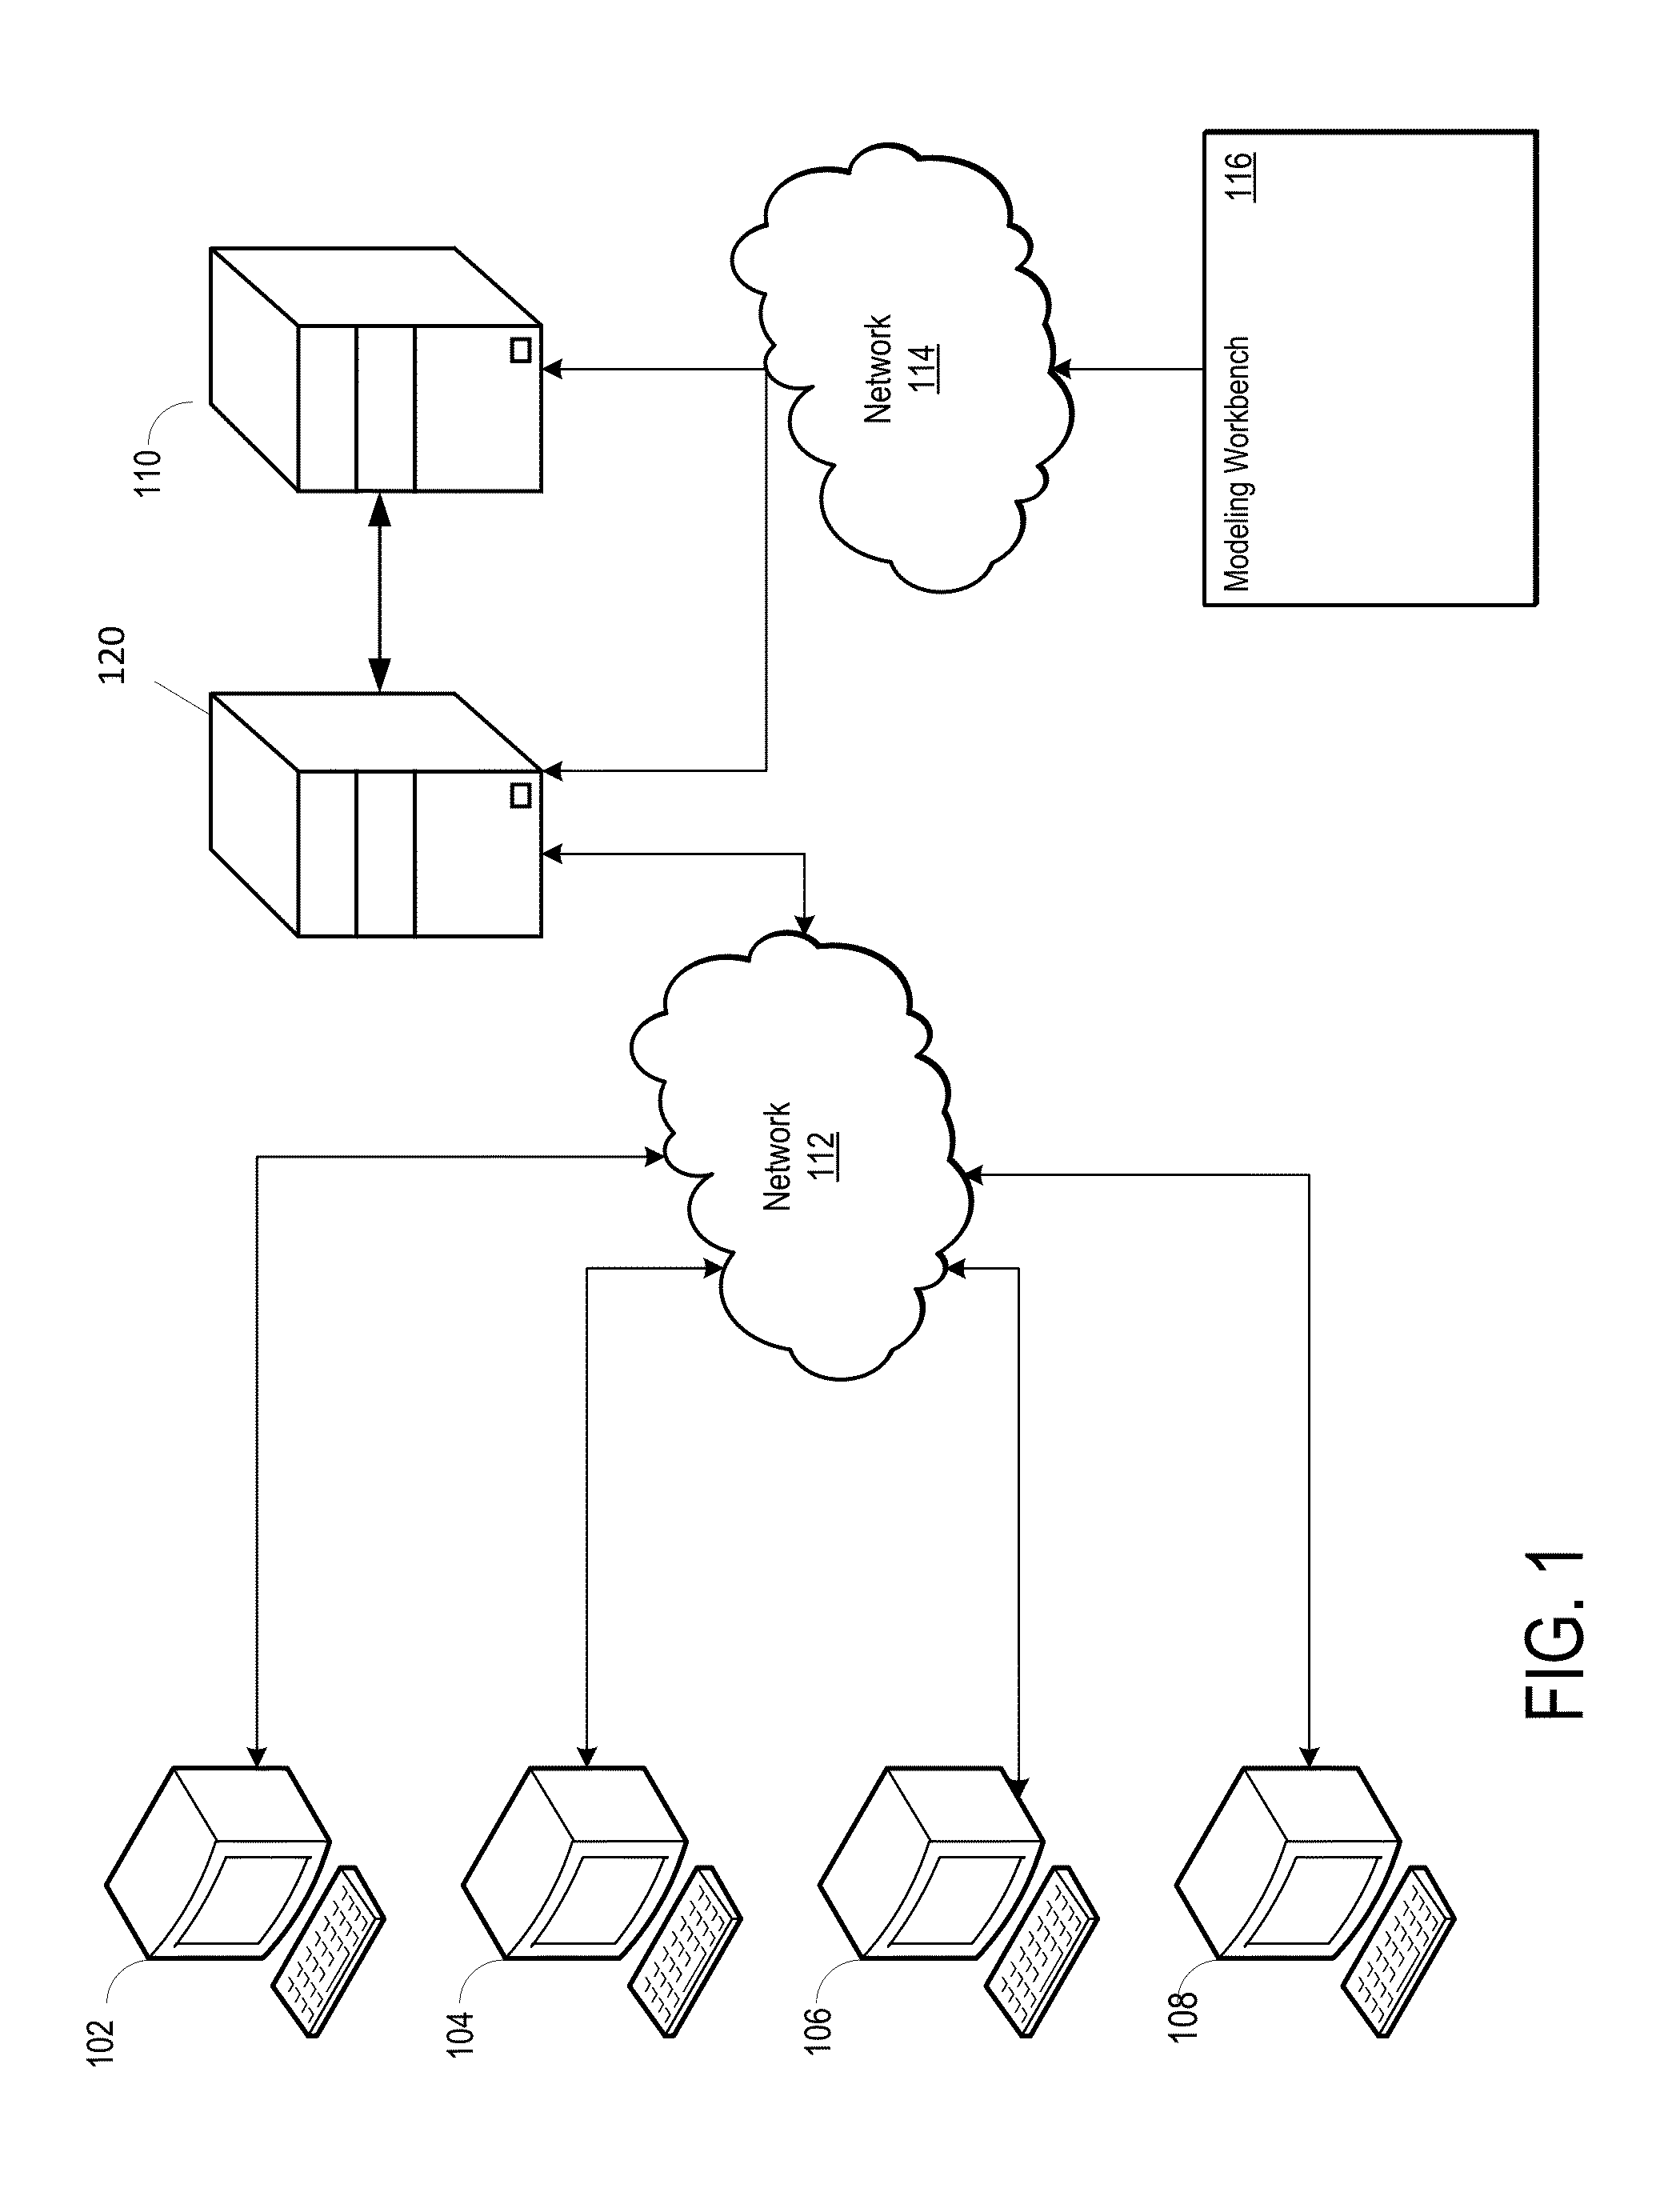 Method and system for efficient and comprehensive product configuration and searching